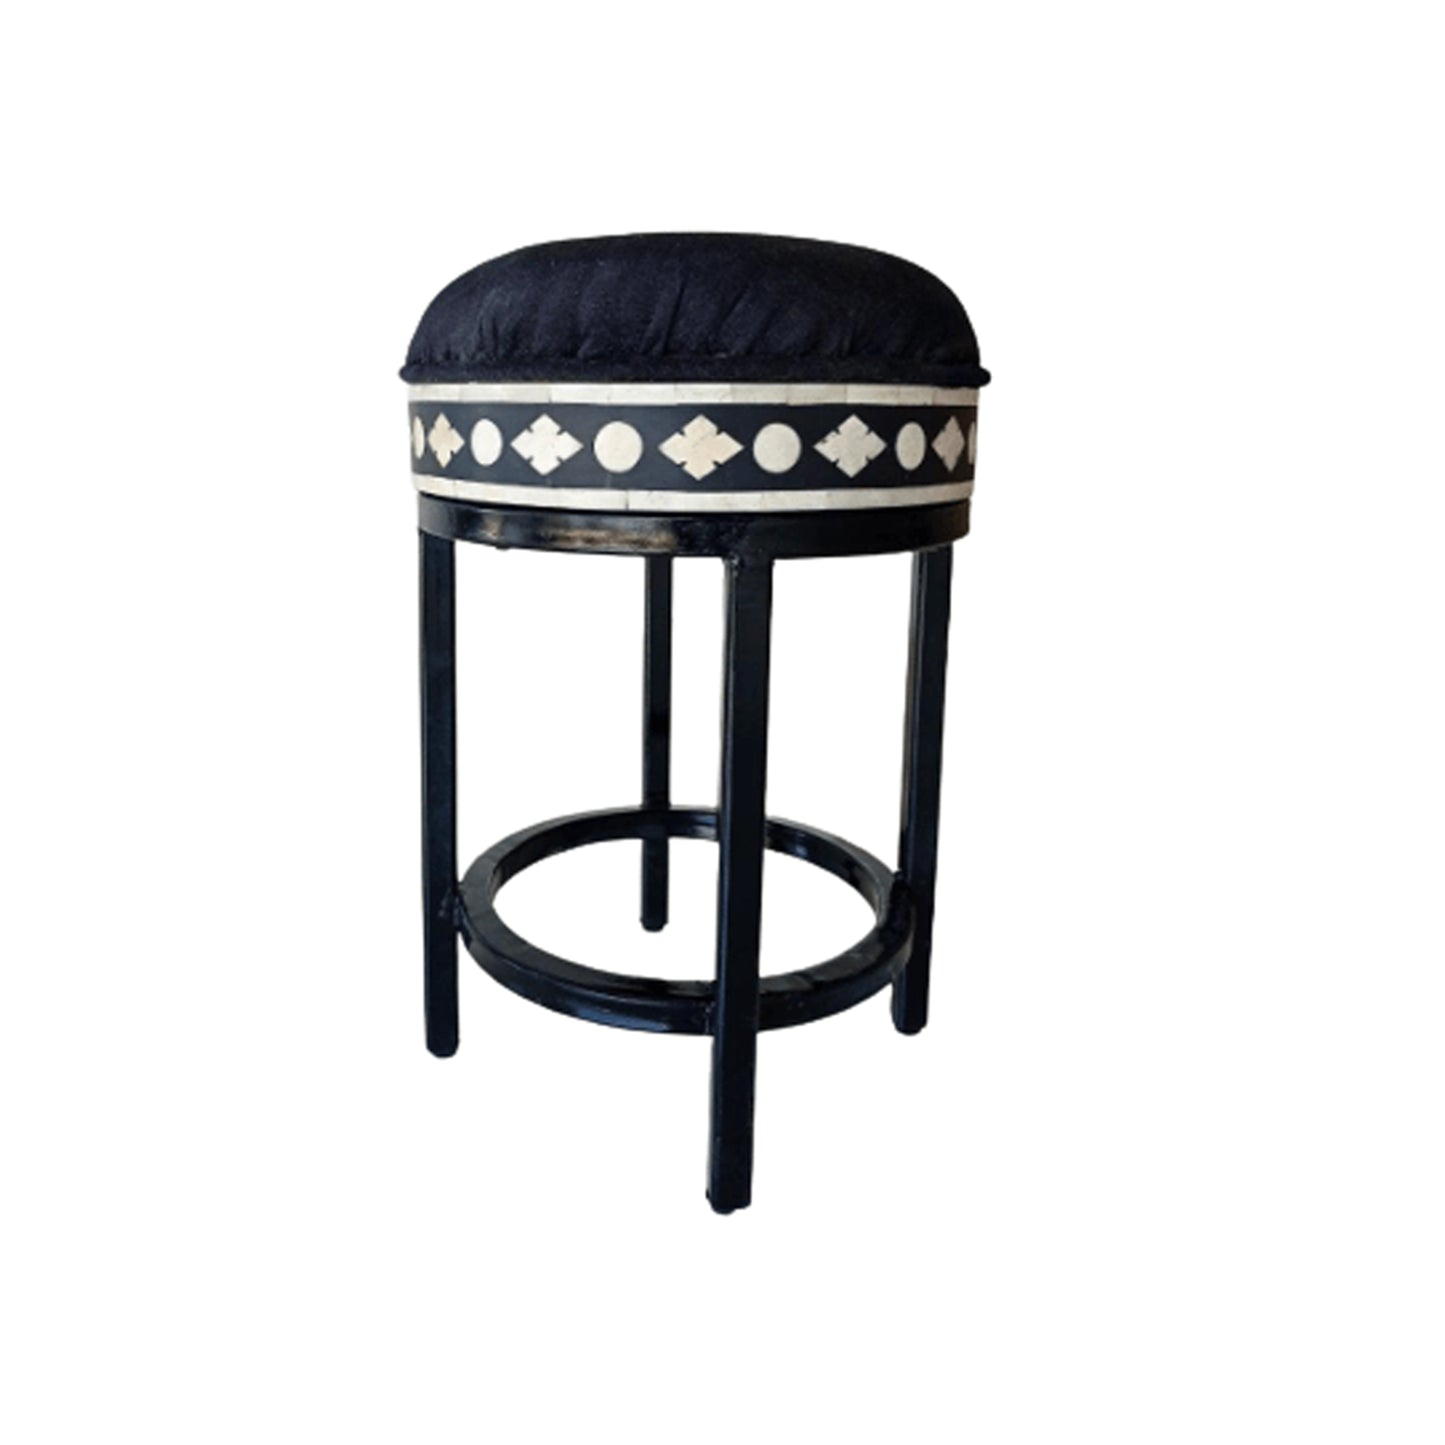 Handmade Bone Inlay Personalized Black Round Stool Home Décor Furniture Classic Vintage Look